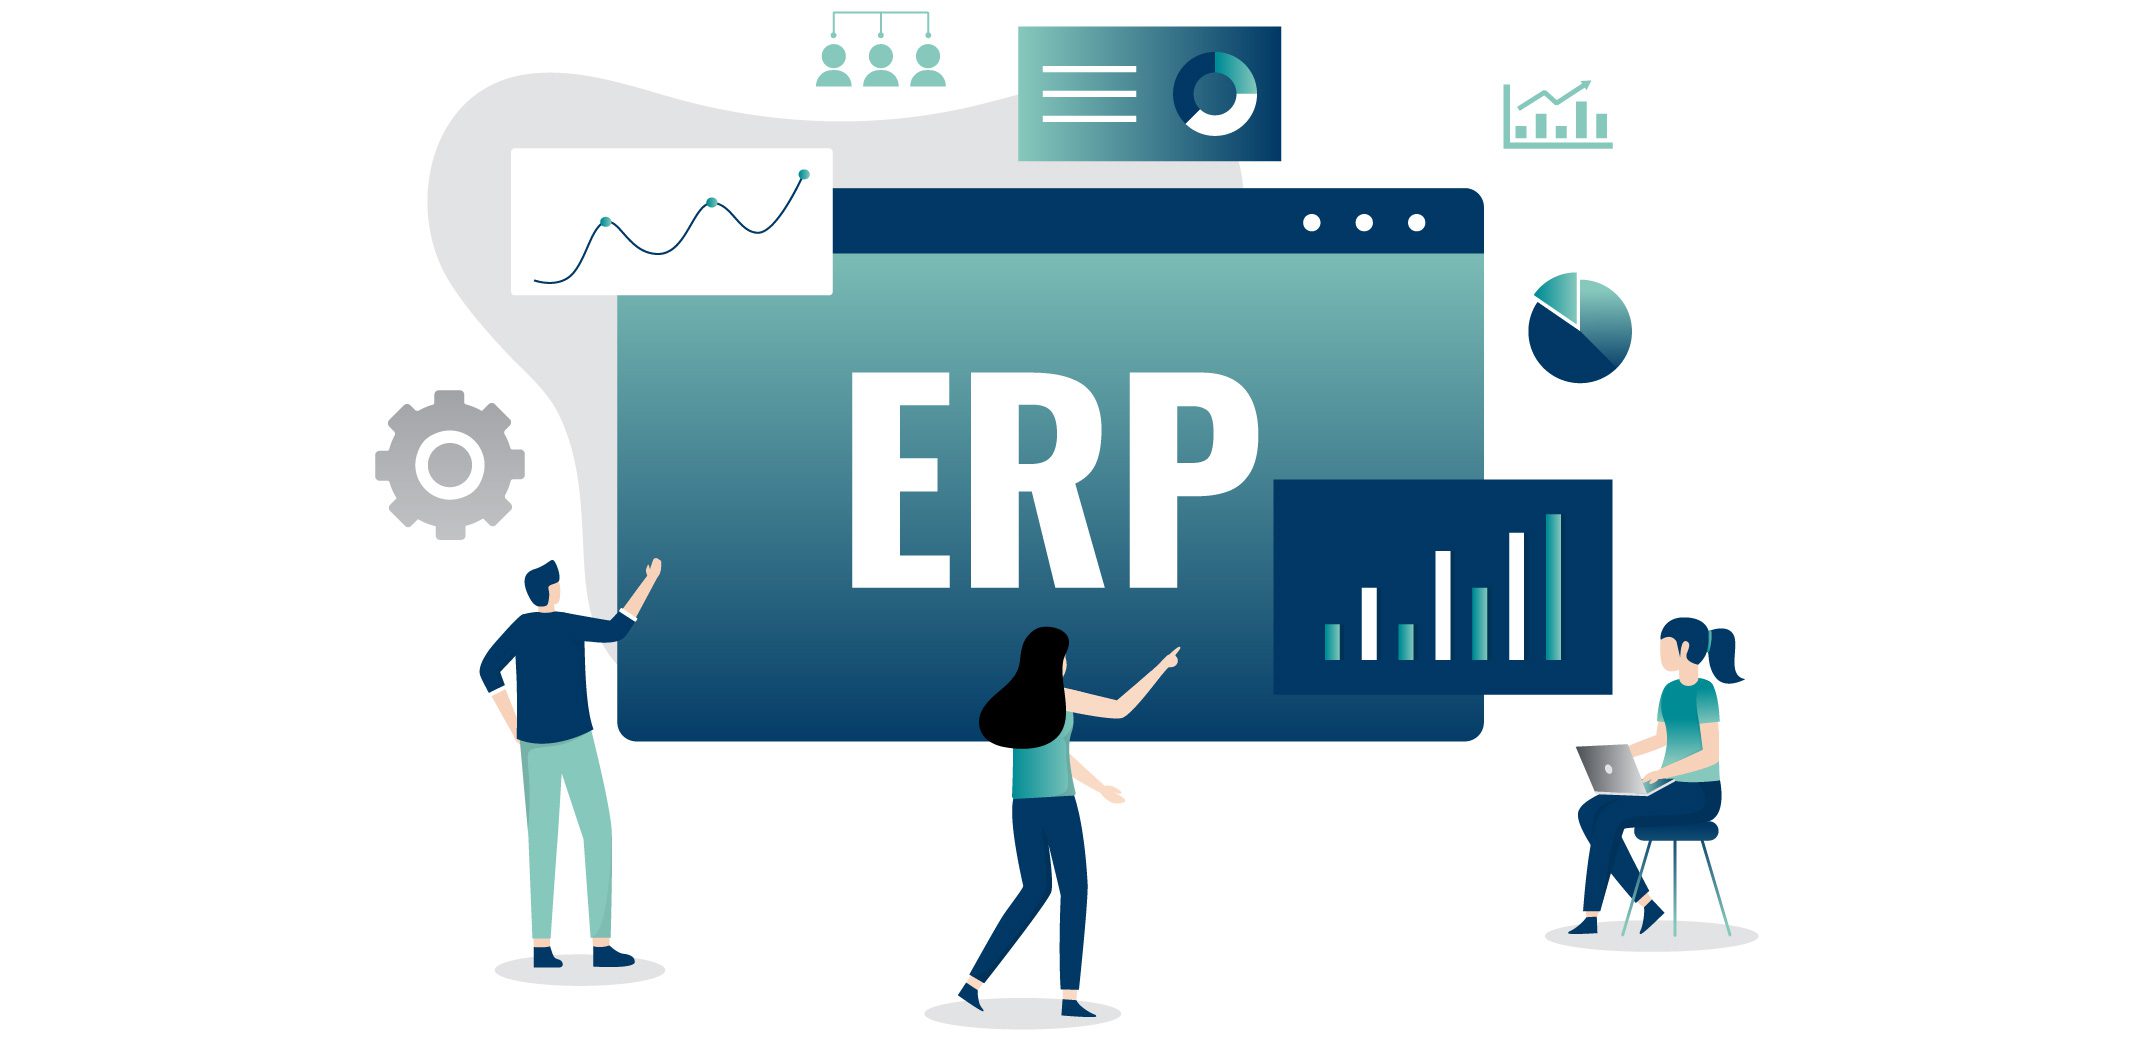 Your ERP system migration doesn't have to be an ordeal.